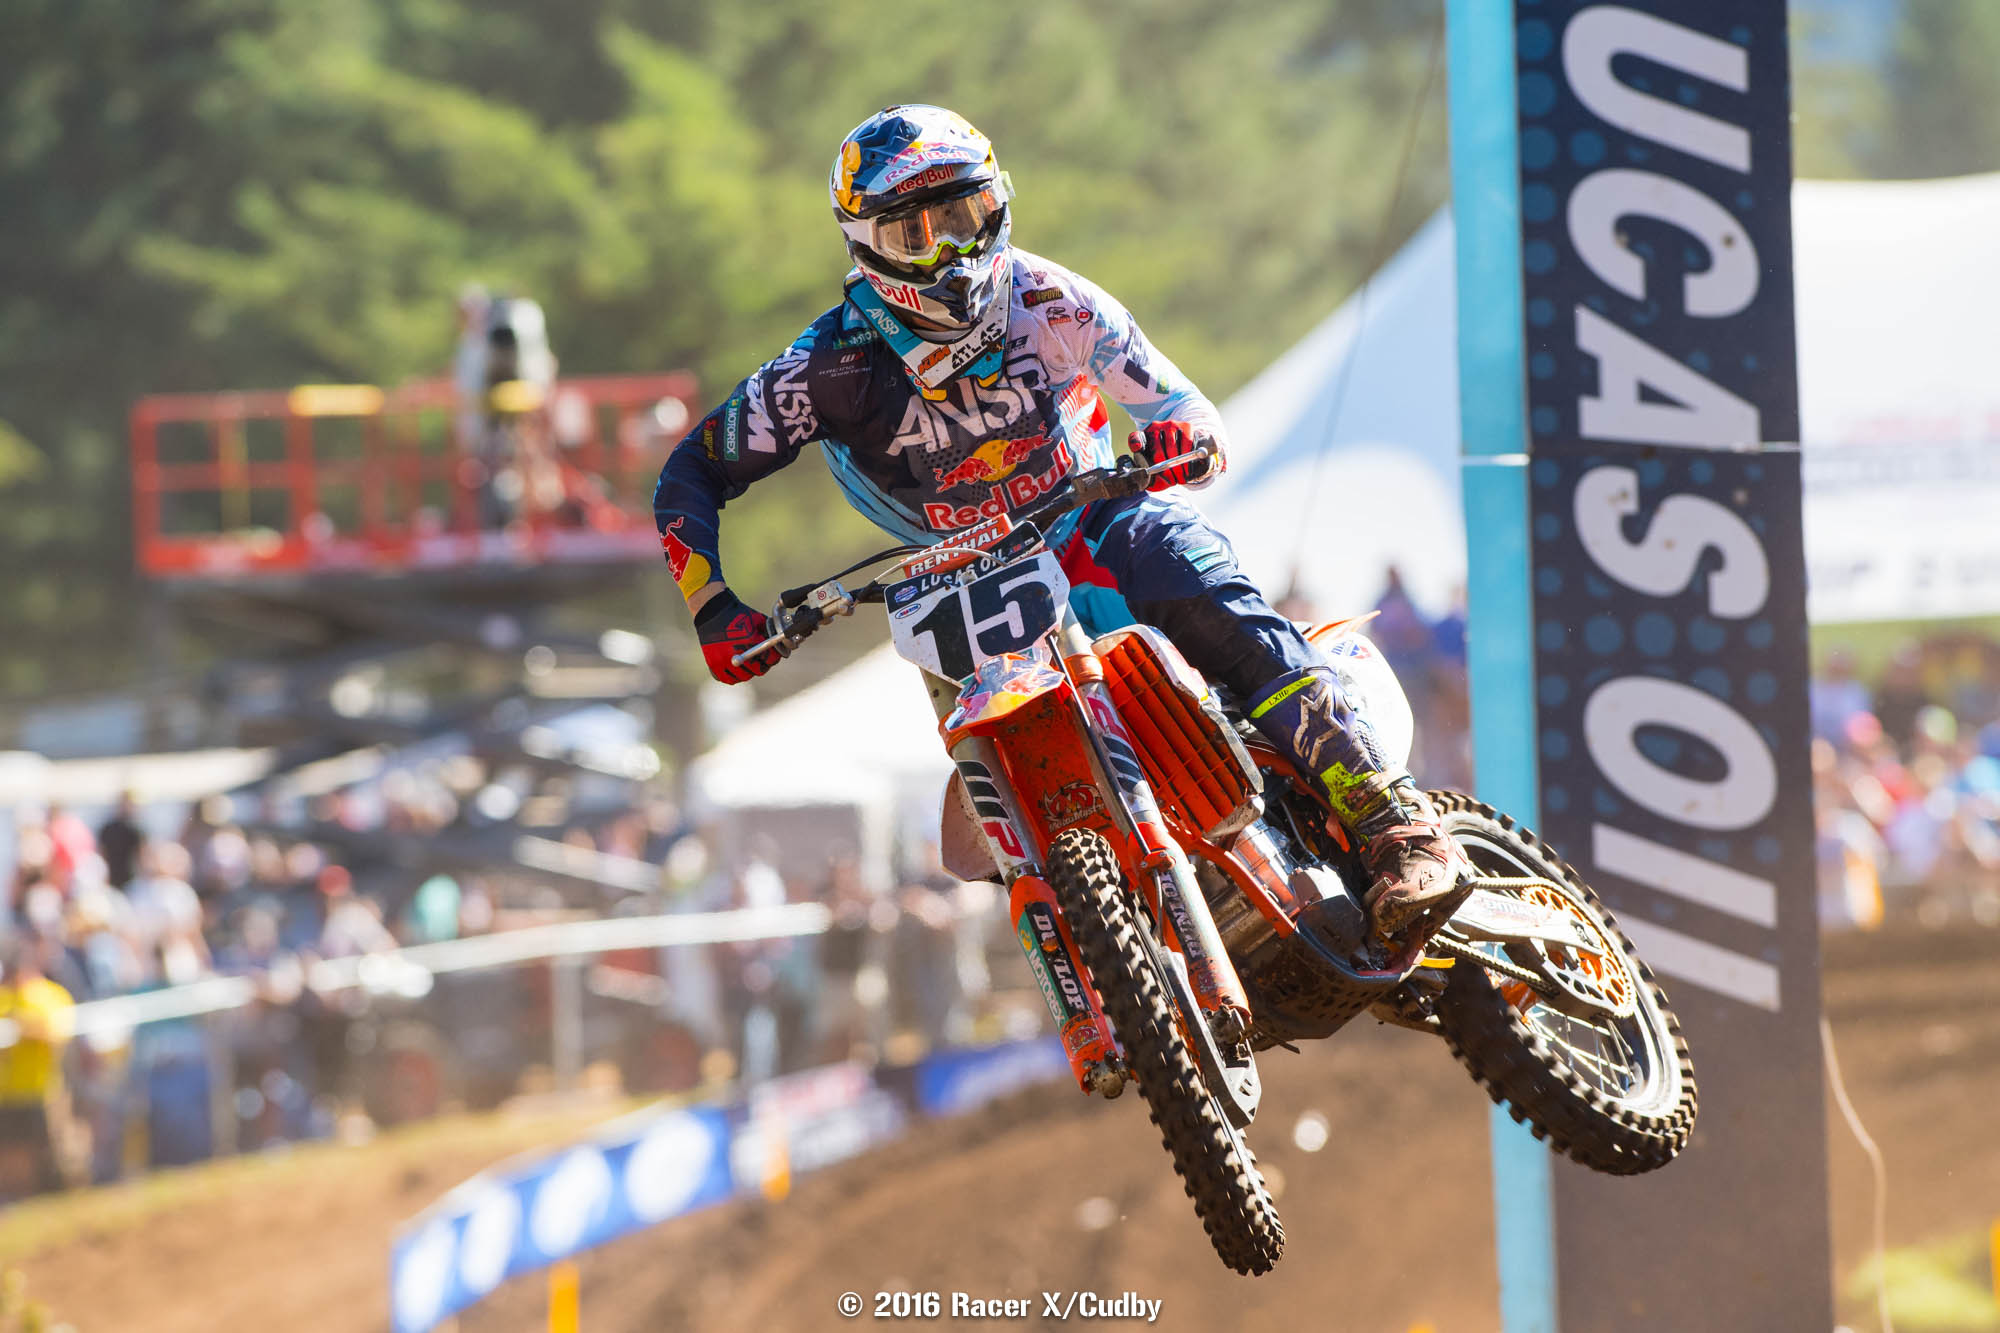 Washougal Mx Race Schedule : GoPro Onboard & Analysis From The 2019